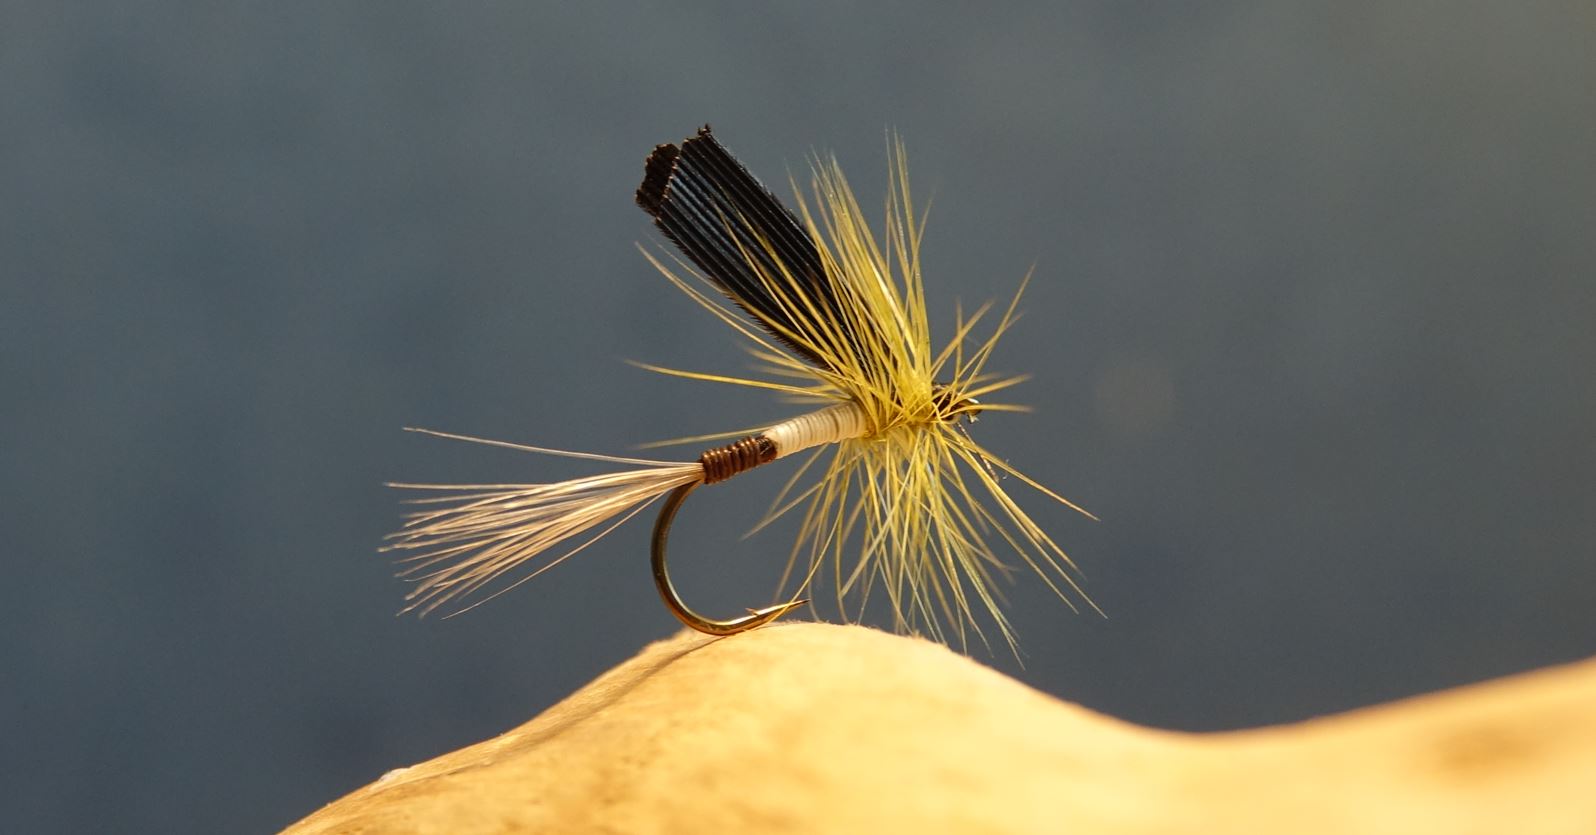 gallica olive baetis mouche fly dry flytying eclosion